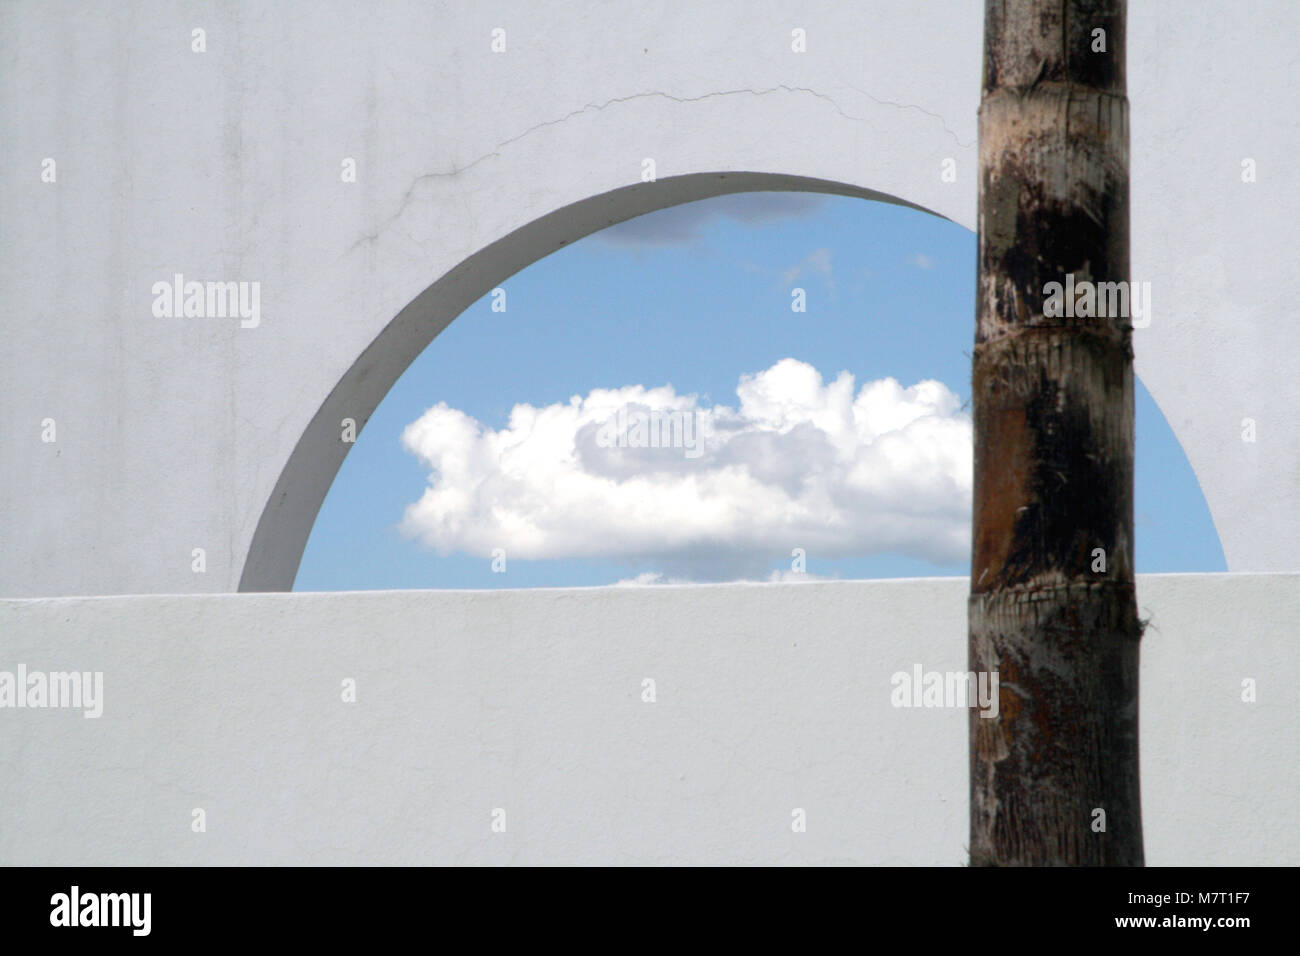 Cloud seen through and arch opening in a white wall. Palm tree trunk in the foreground Stock Photo